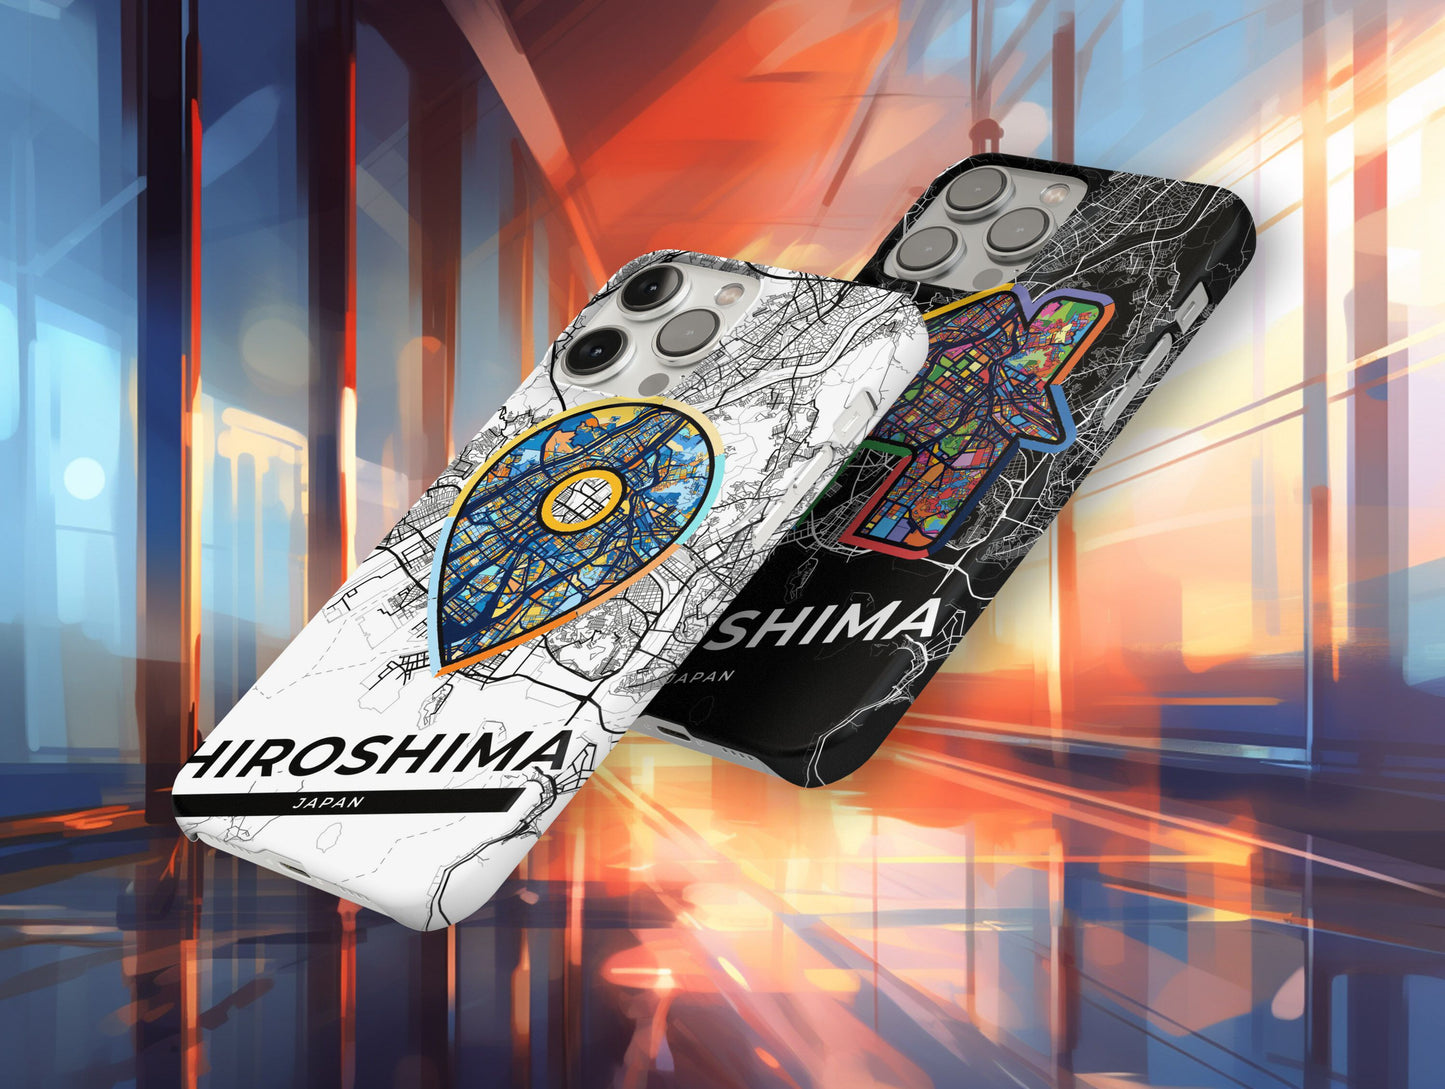 Hiroshima Japan slim phone case with colorful icon. Birthday, wedding or housewarming gift. Couple match cases.